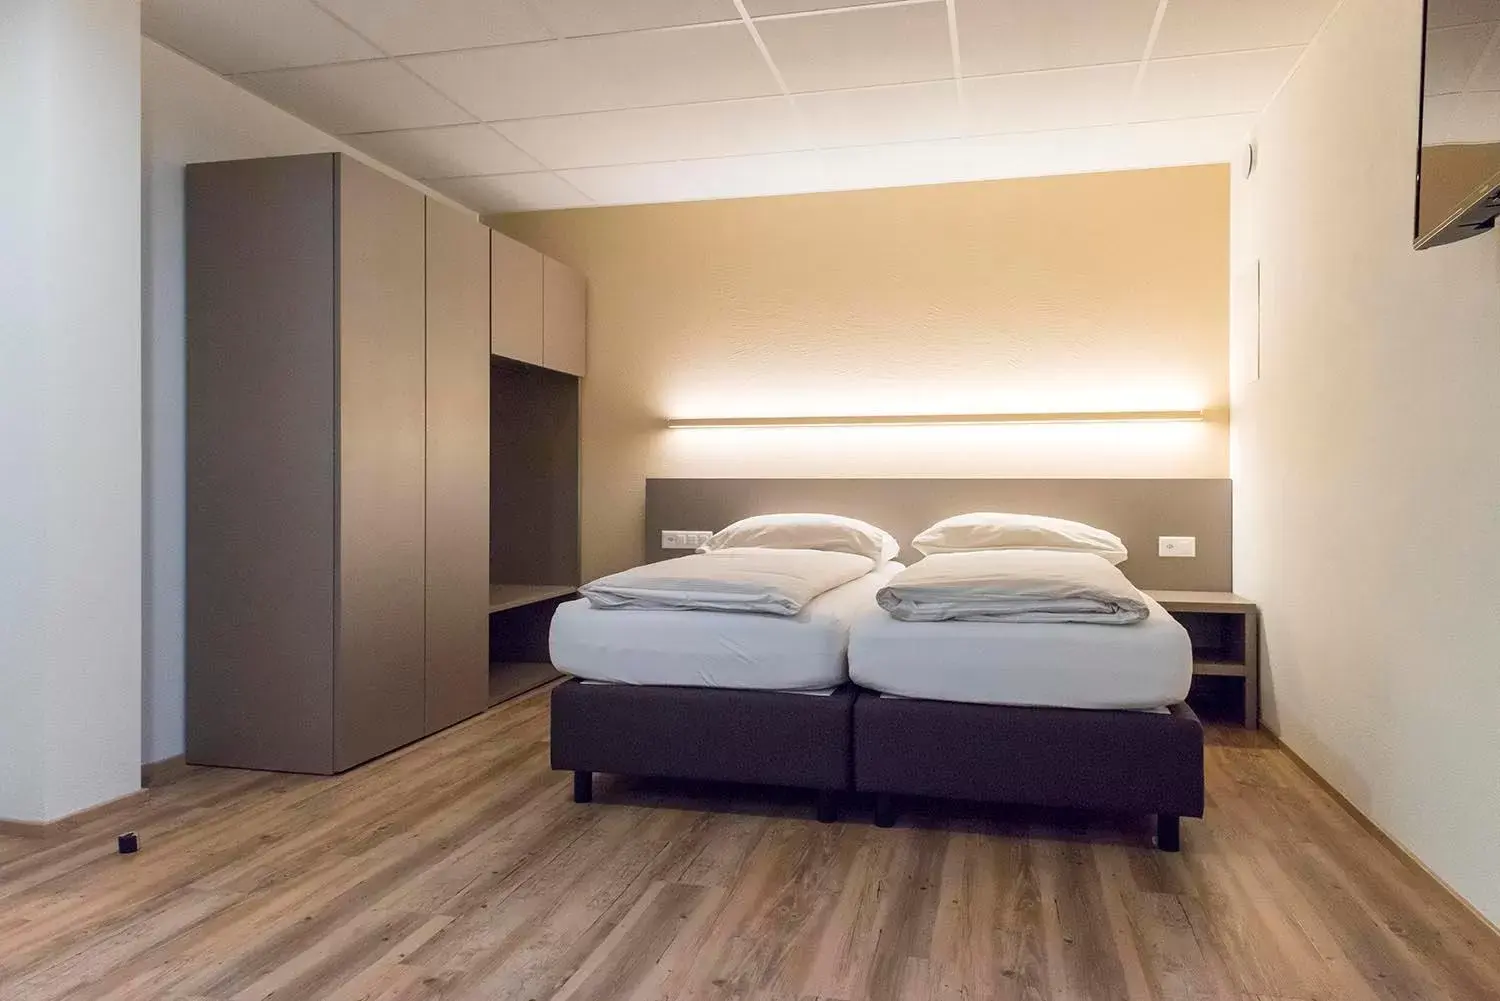 Bed in Hotel am Kreisel: Self-Service Check-In Hotel